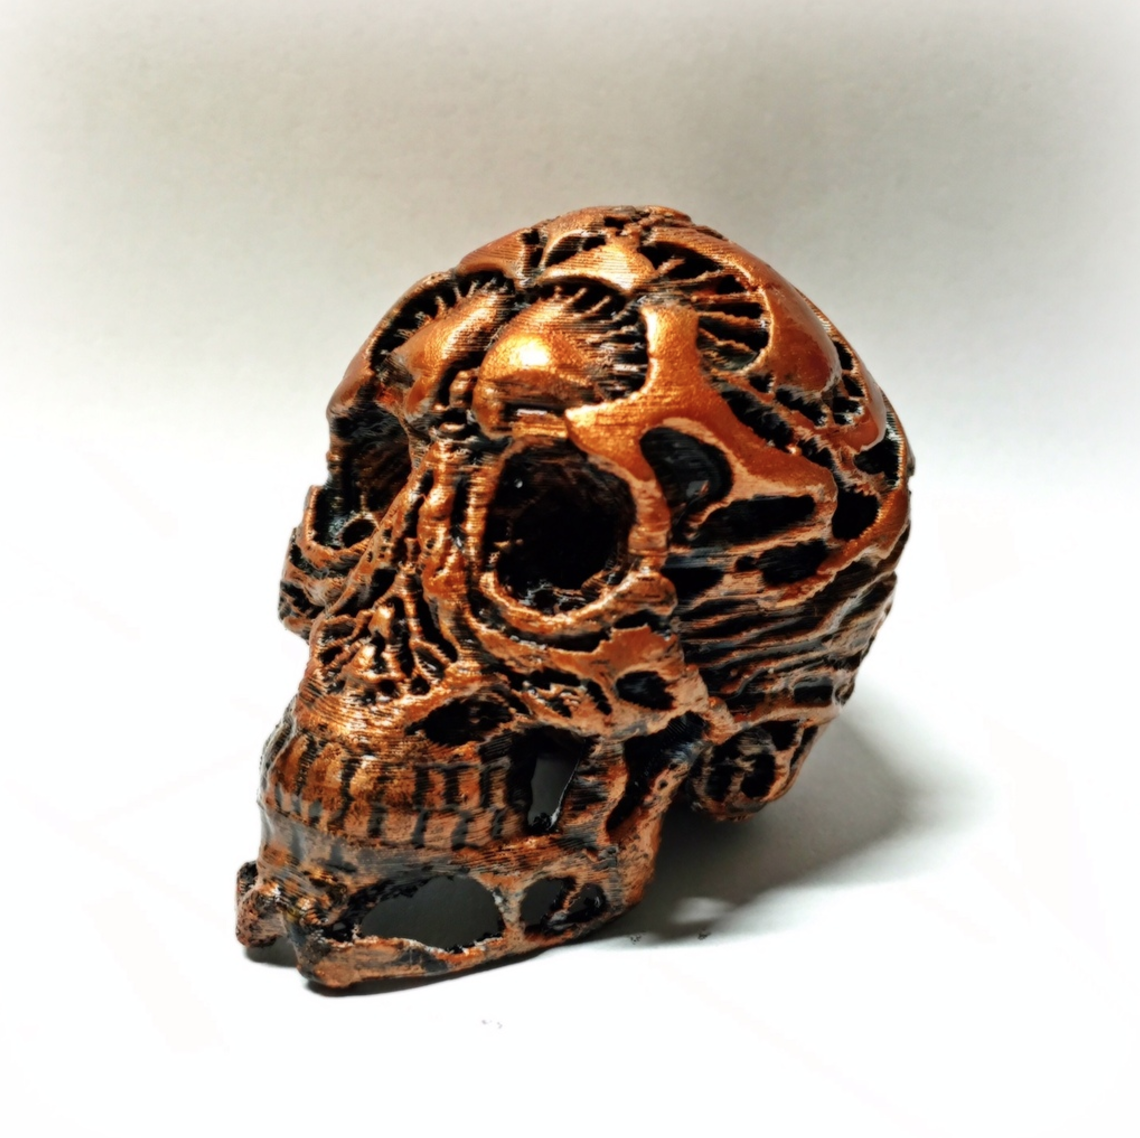 Capture d’écran 2016-12-13 à 15.25.19.png Download free STL file Hunter Skull HD (with supports) • 3D printing design, Geoffro